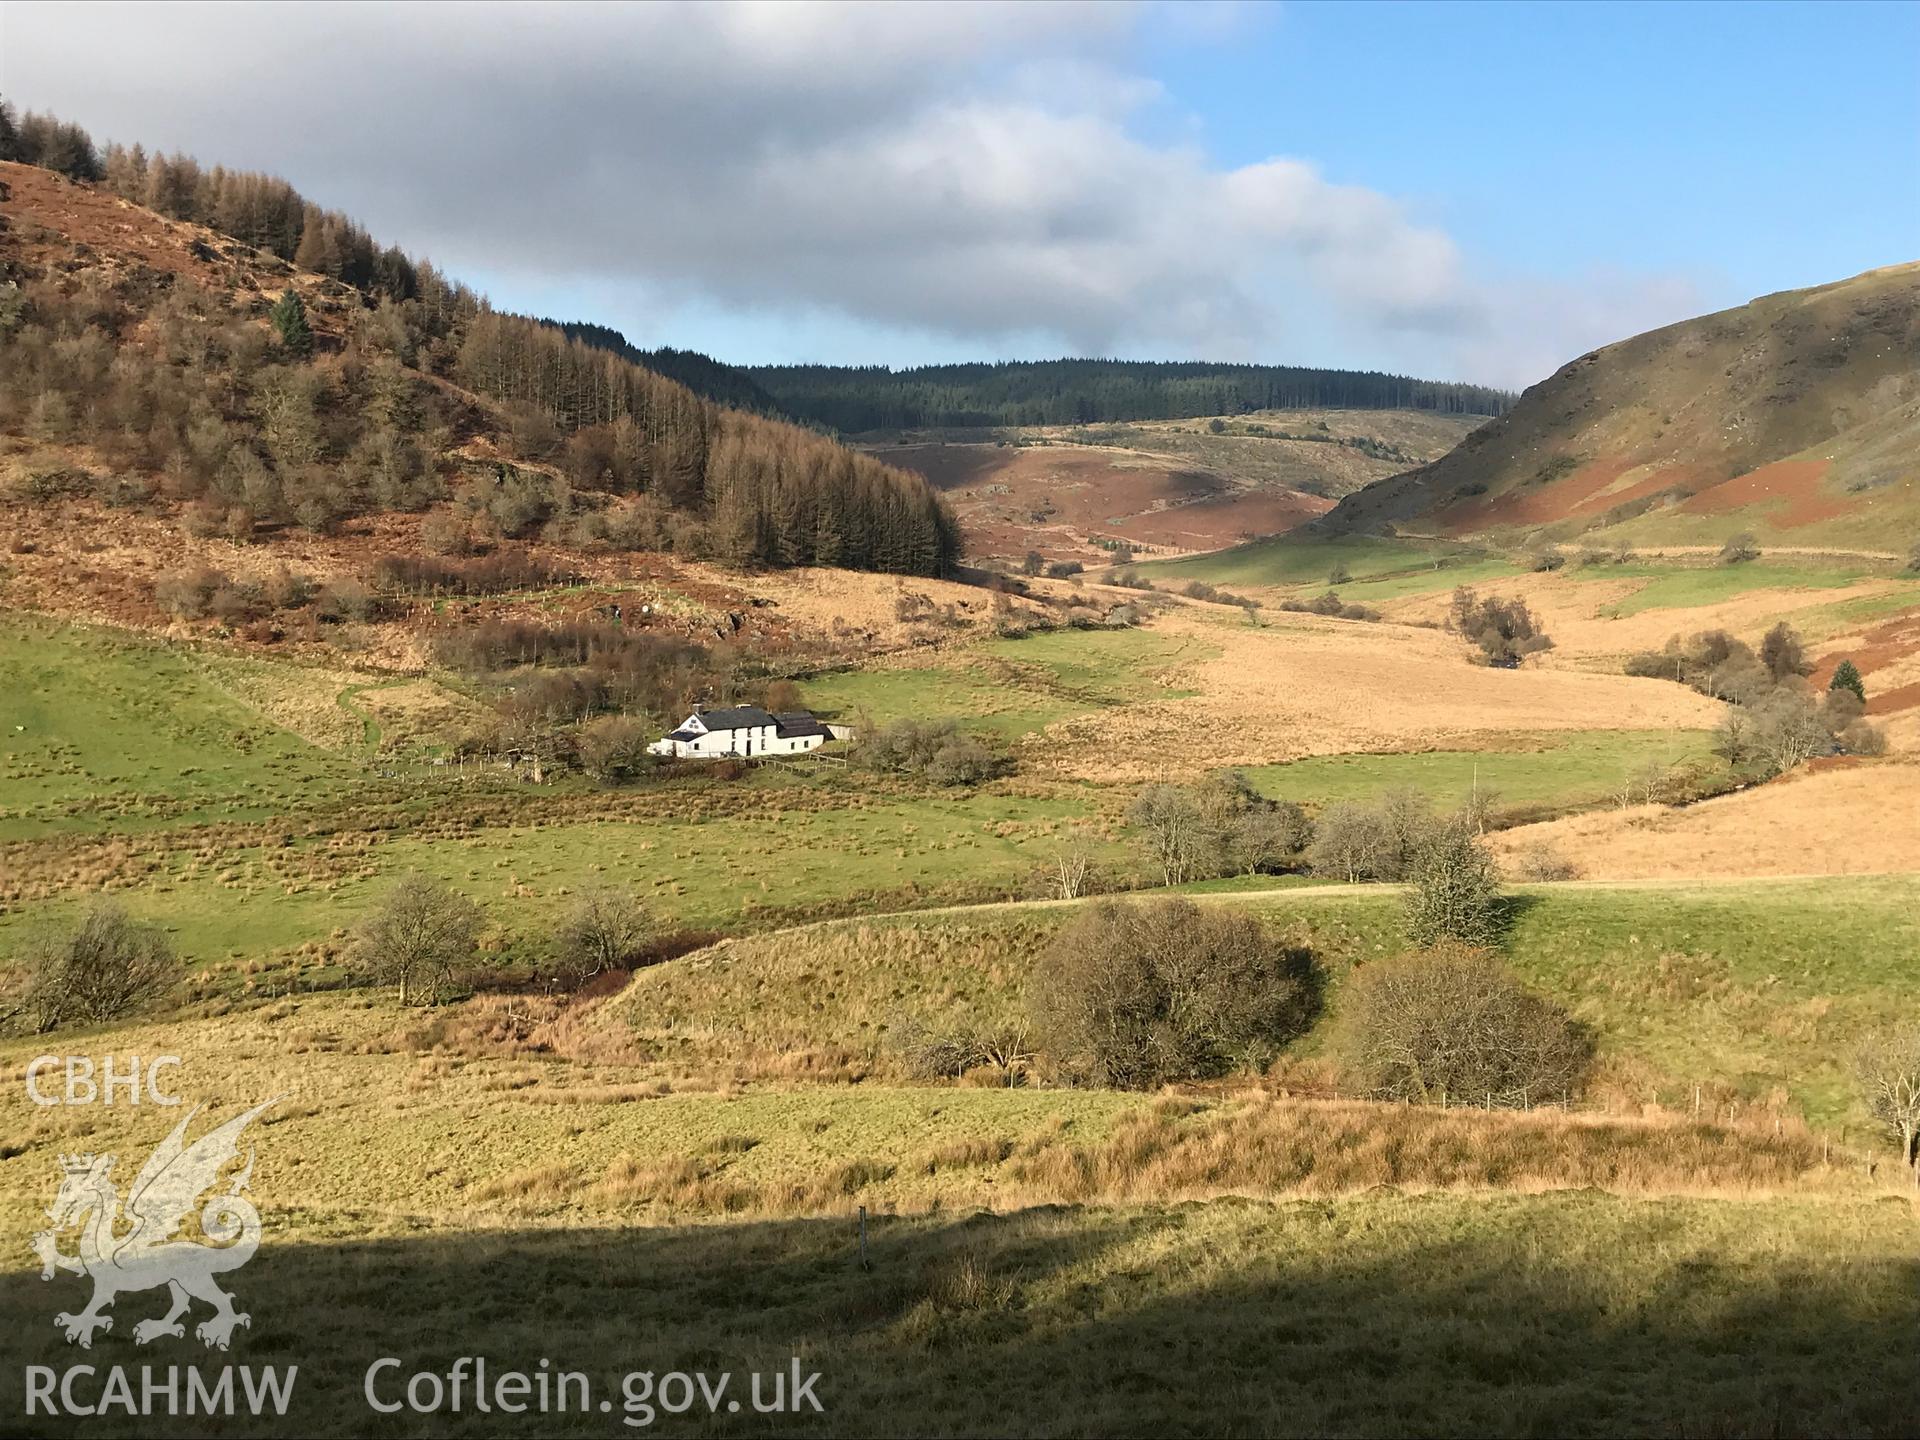 View from the east of Dolgoch youth hostel, Tregaron. Colour photograph taken by Paul R. Davis on 1st January 2019.